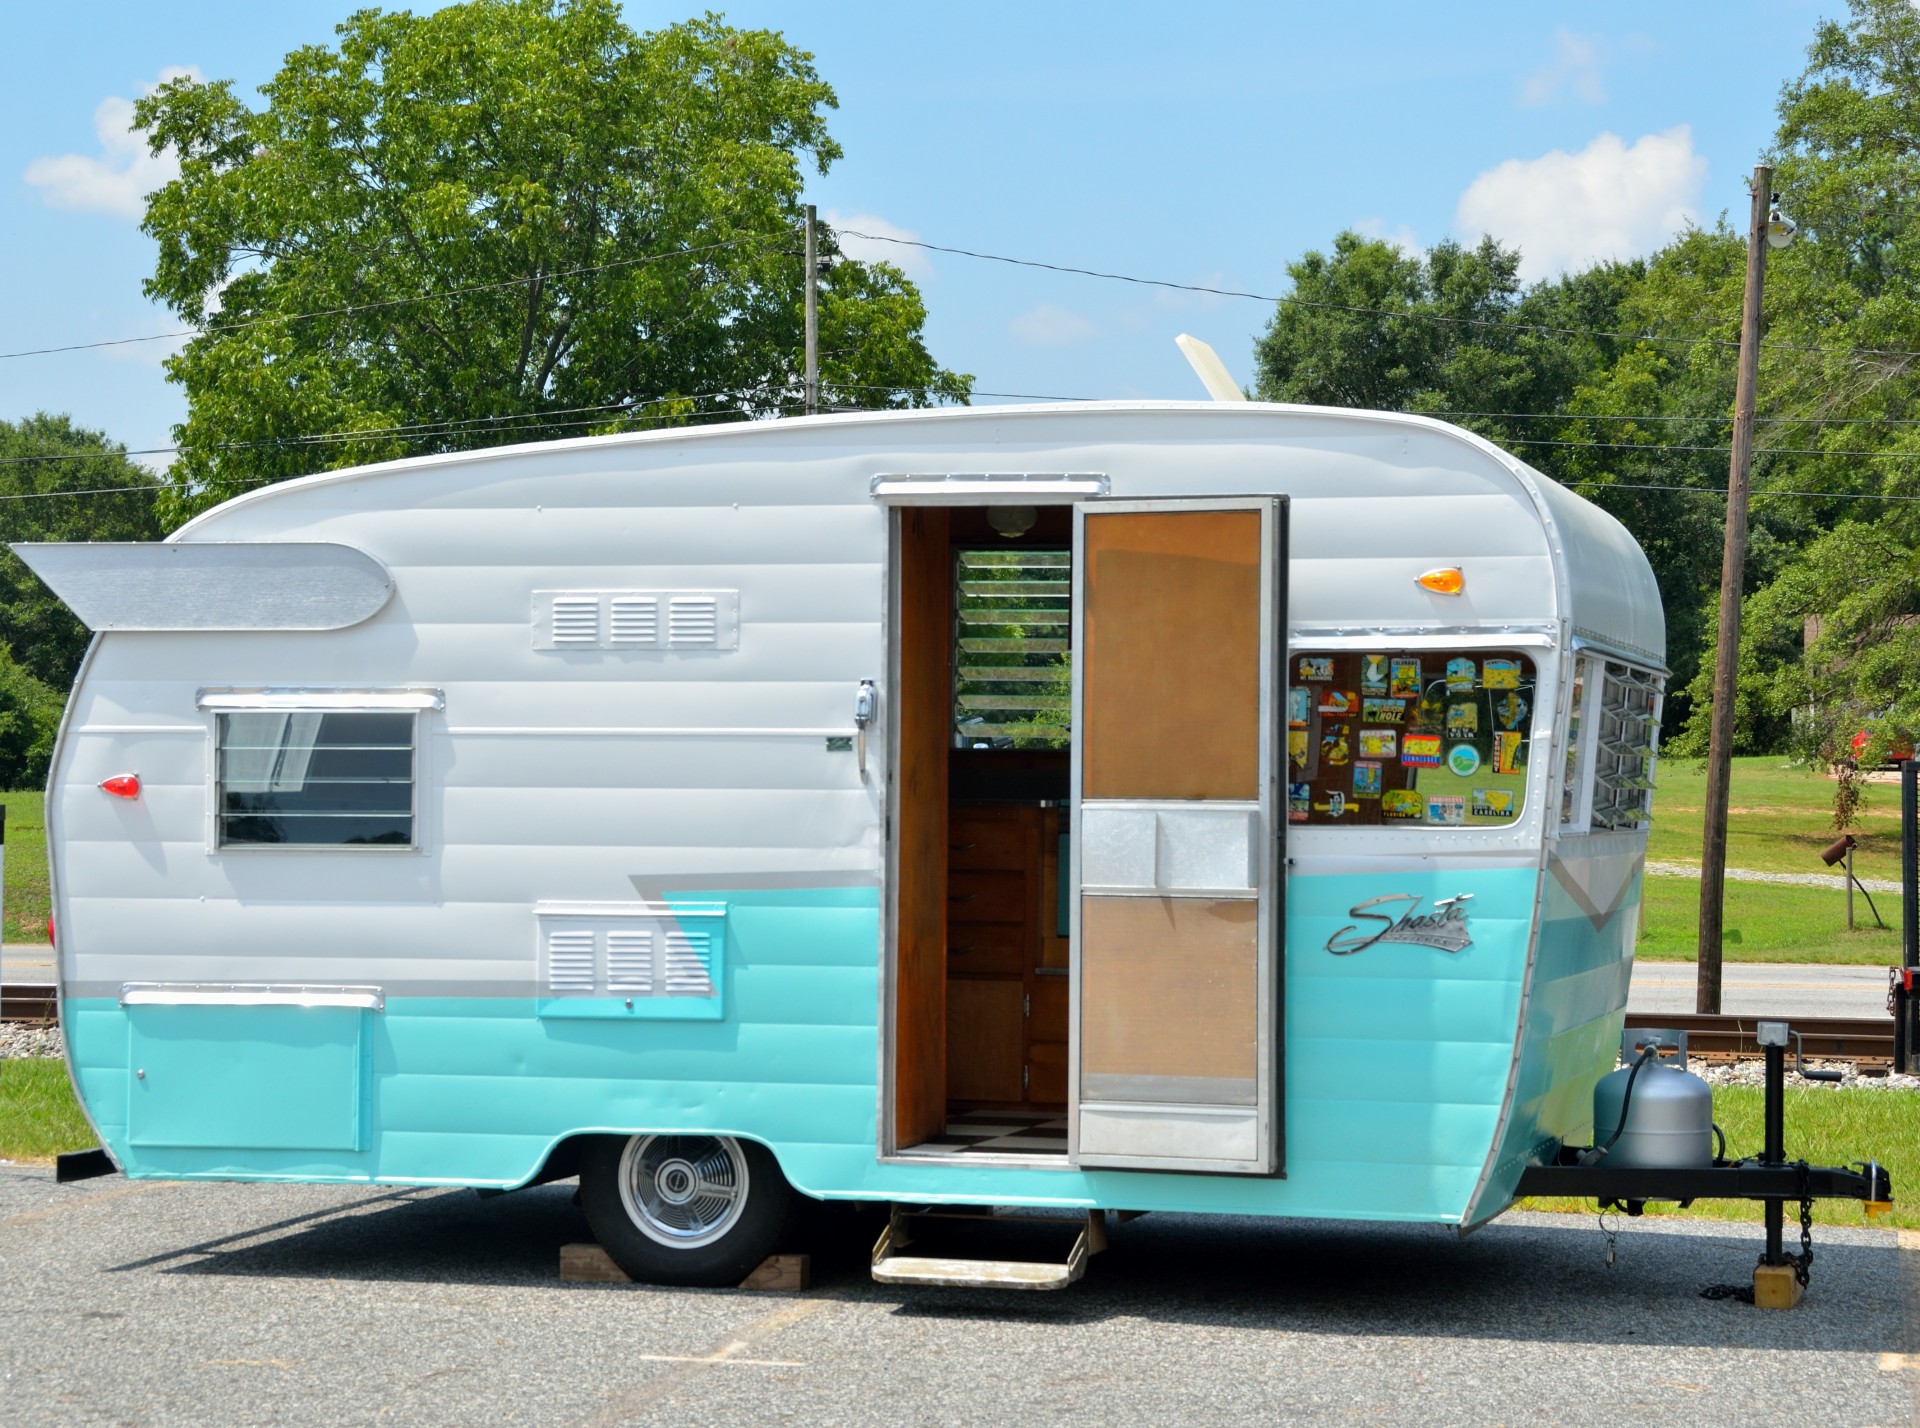 Download free photo of Classic,camper,retro,restored,camping - from needpix.com